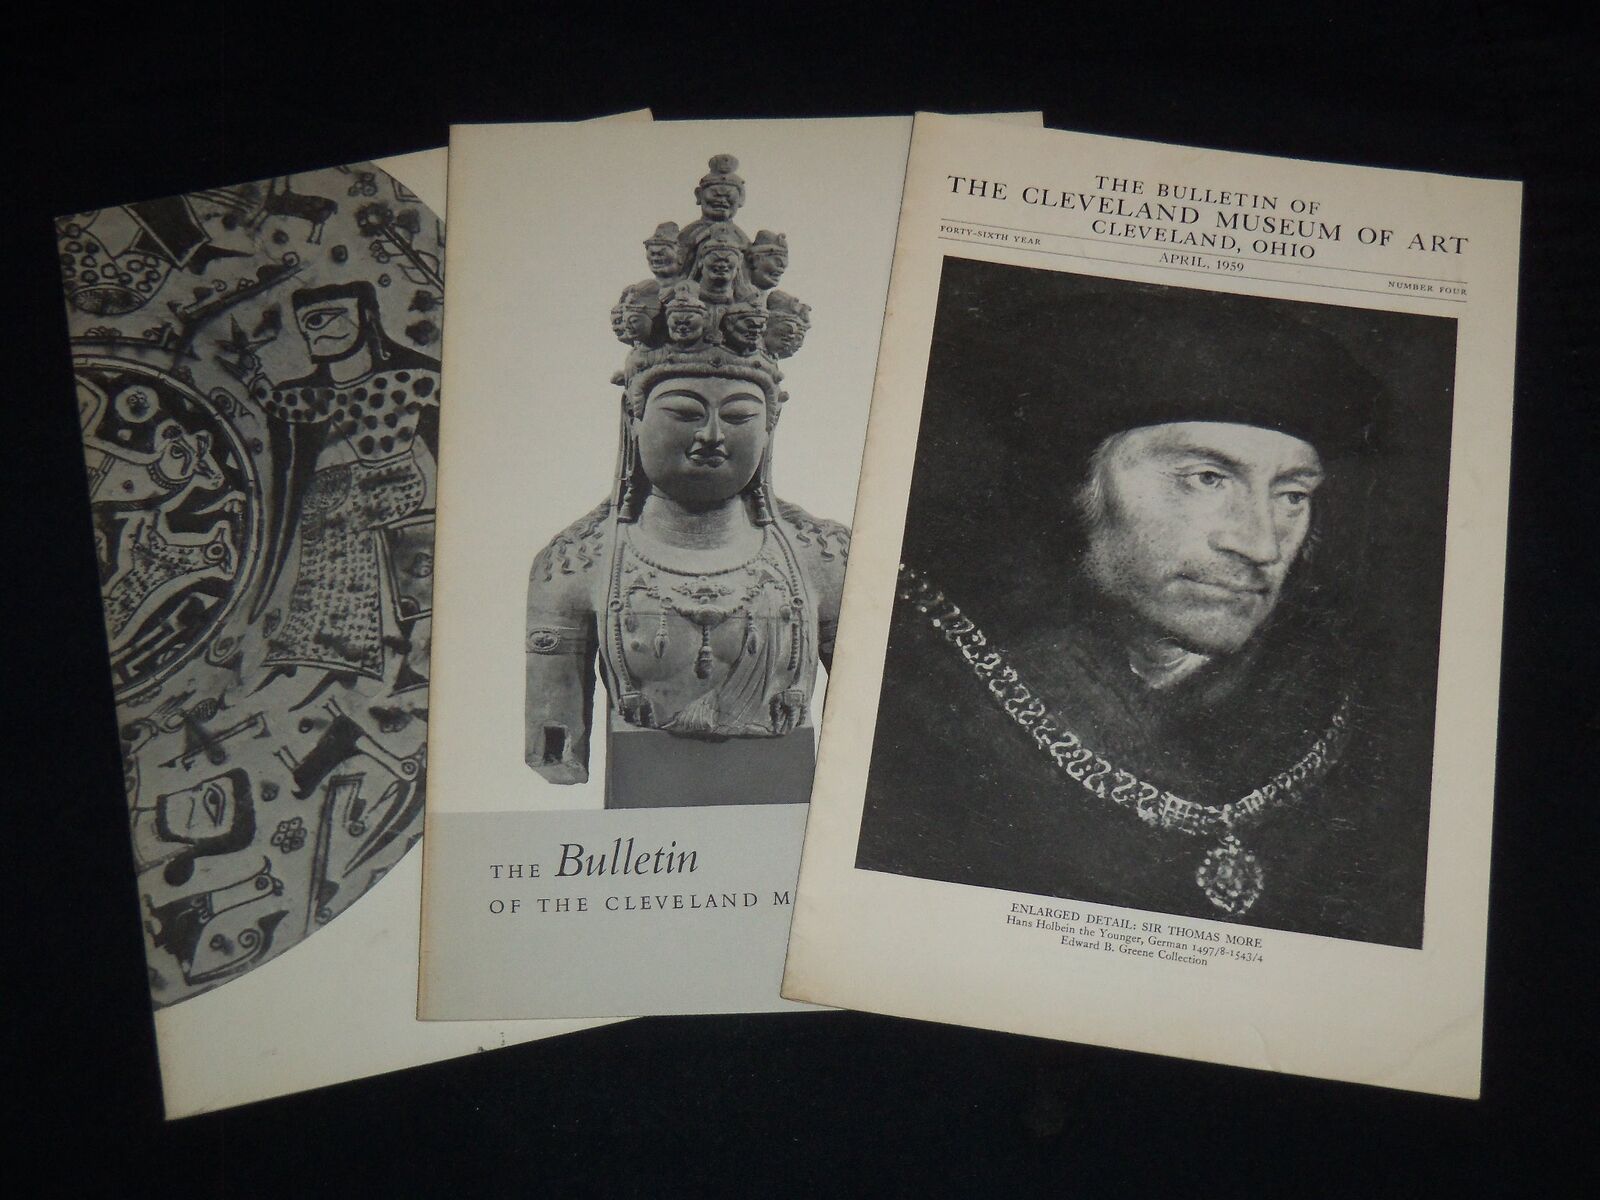 1959-1960 CLEVELAND ART MUSEUM BULLETIN LOT OF 3 ISSUES - J 9073